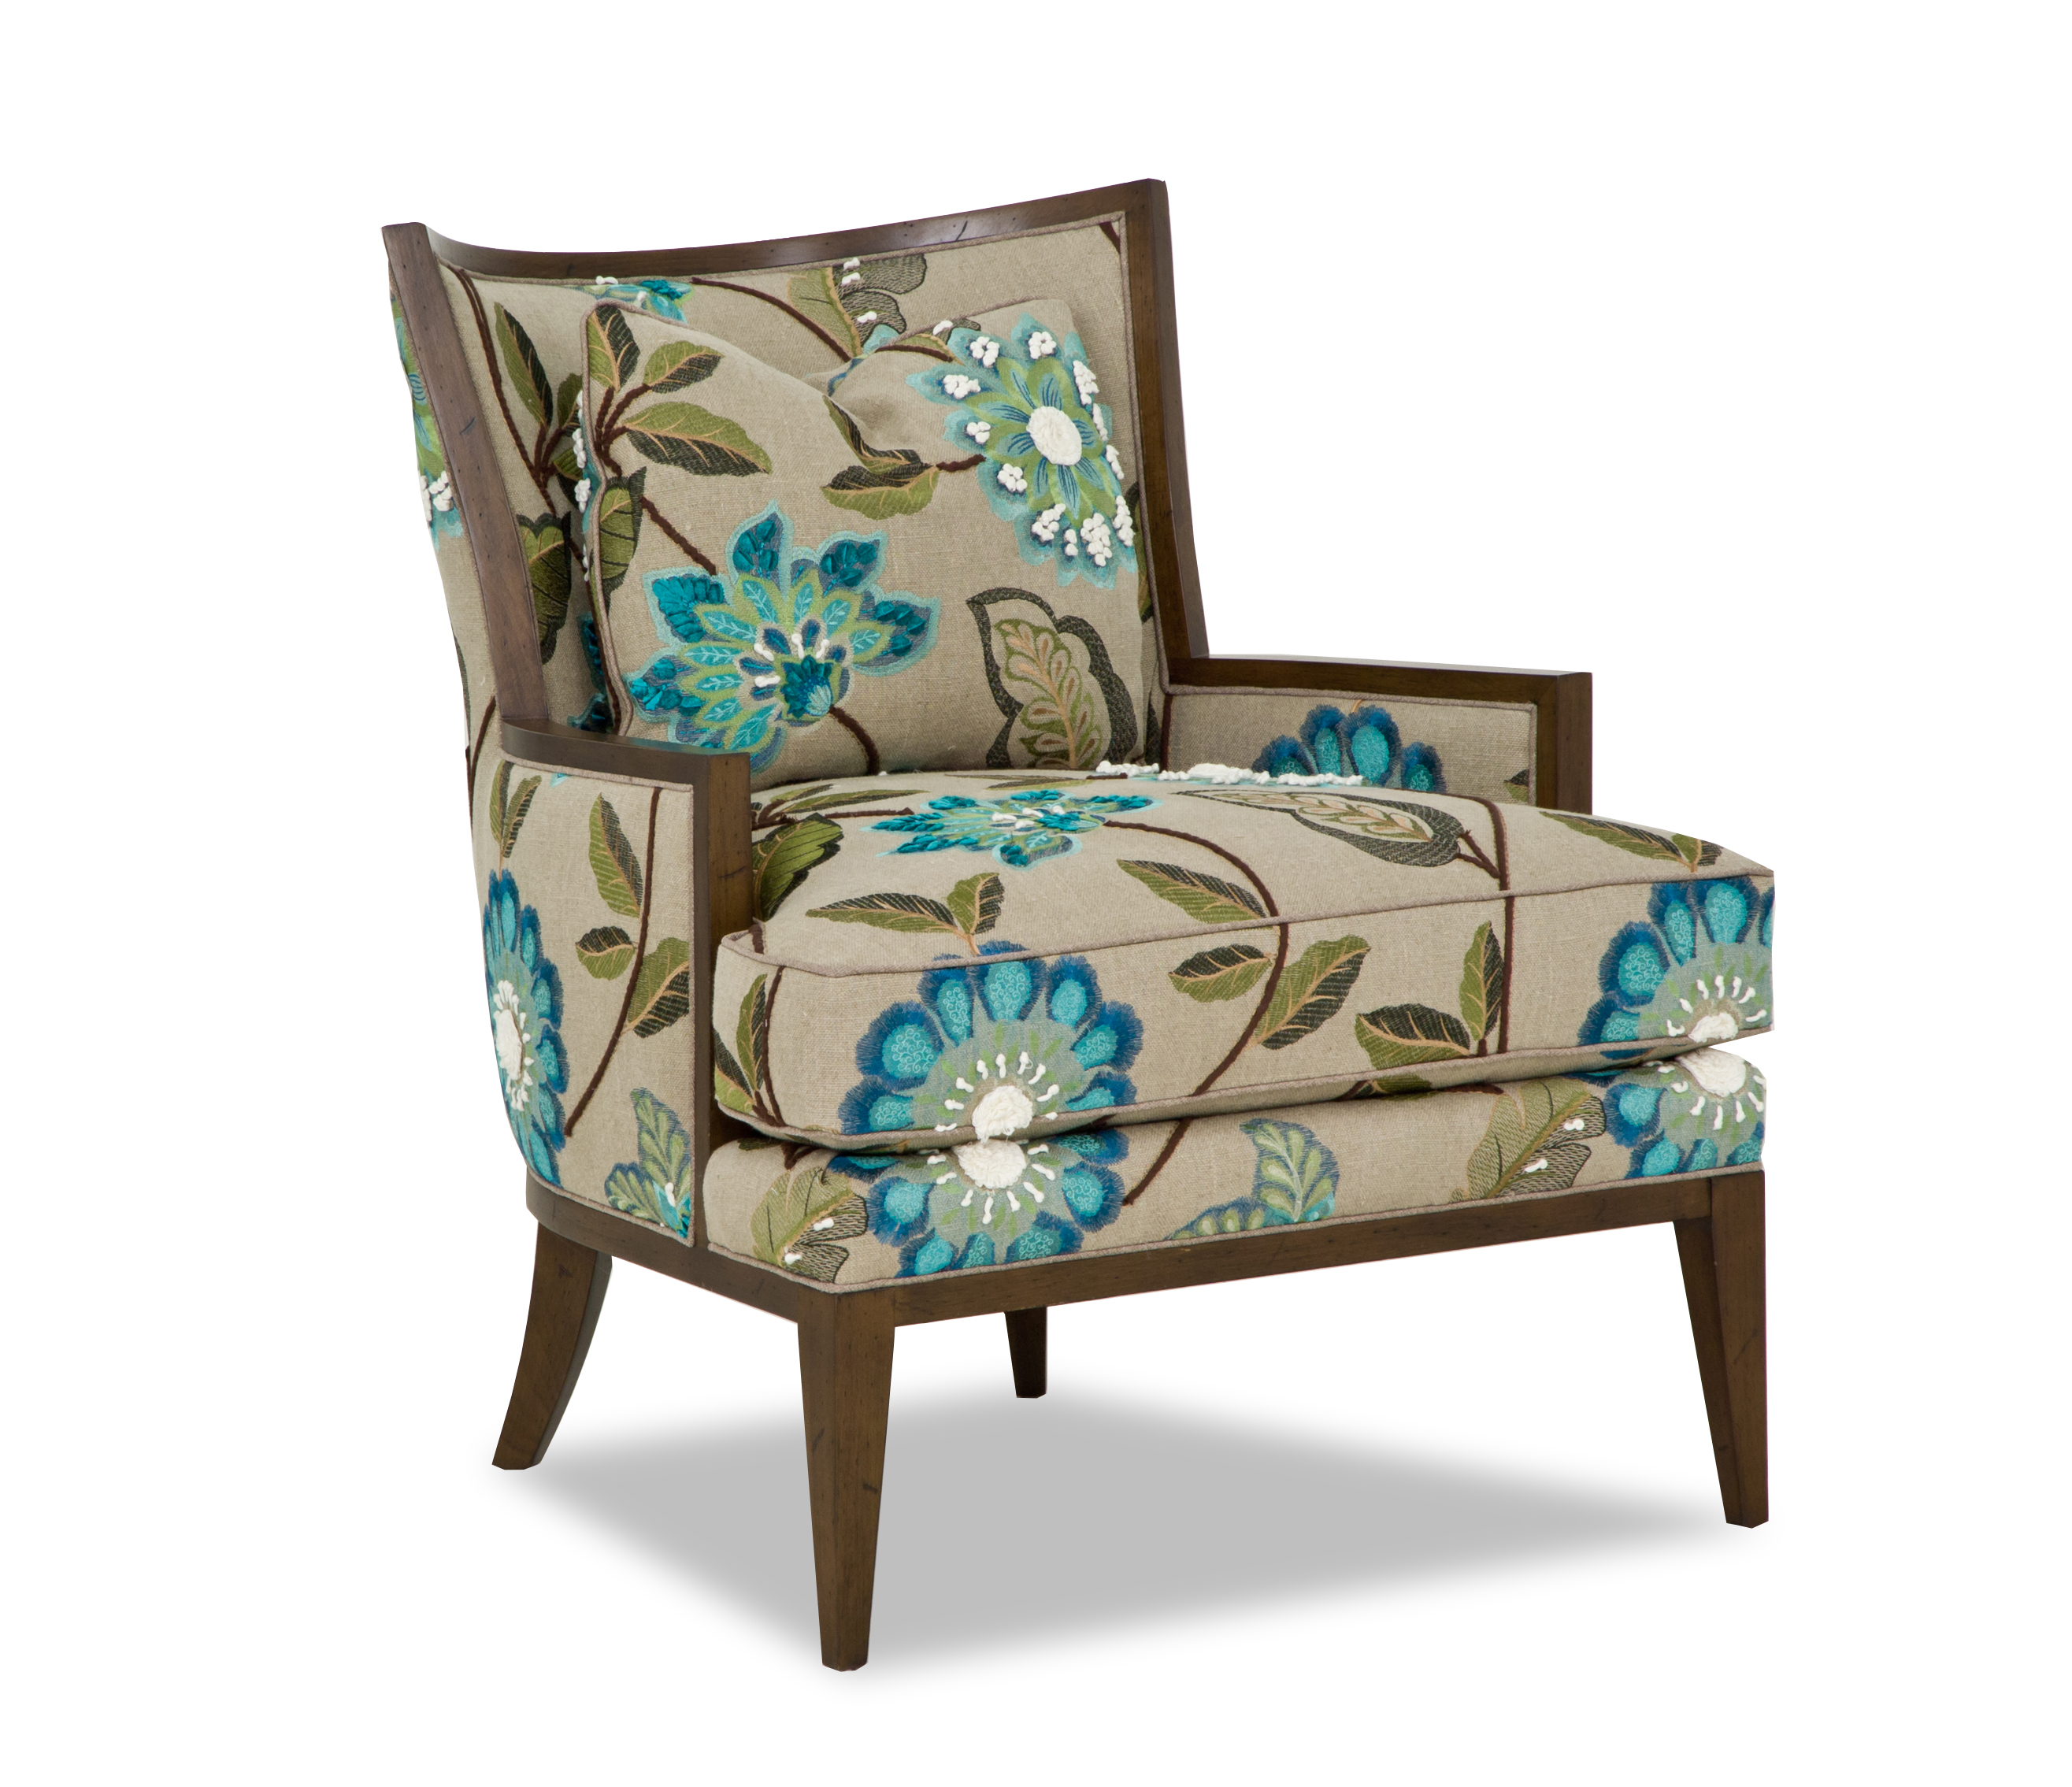 Columbo chair  with sunflower patterns from Taylor King 